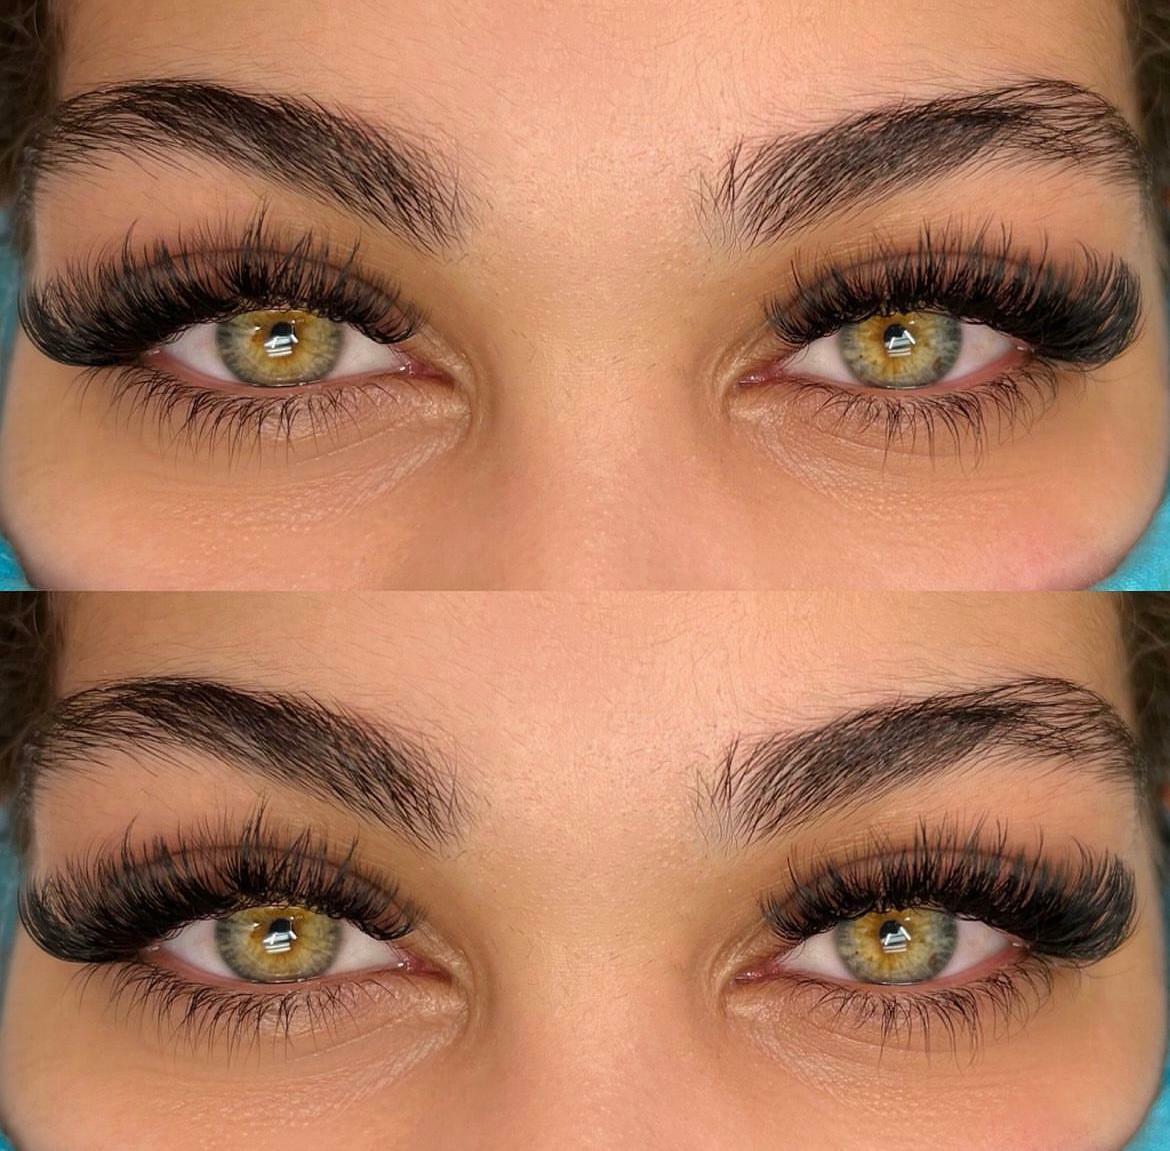 What to Expect from Eyelash Extension Training Program – Lash Boutique